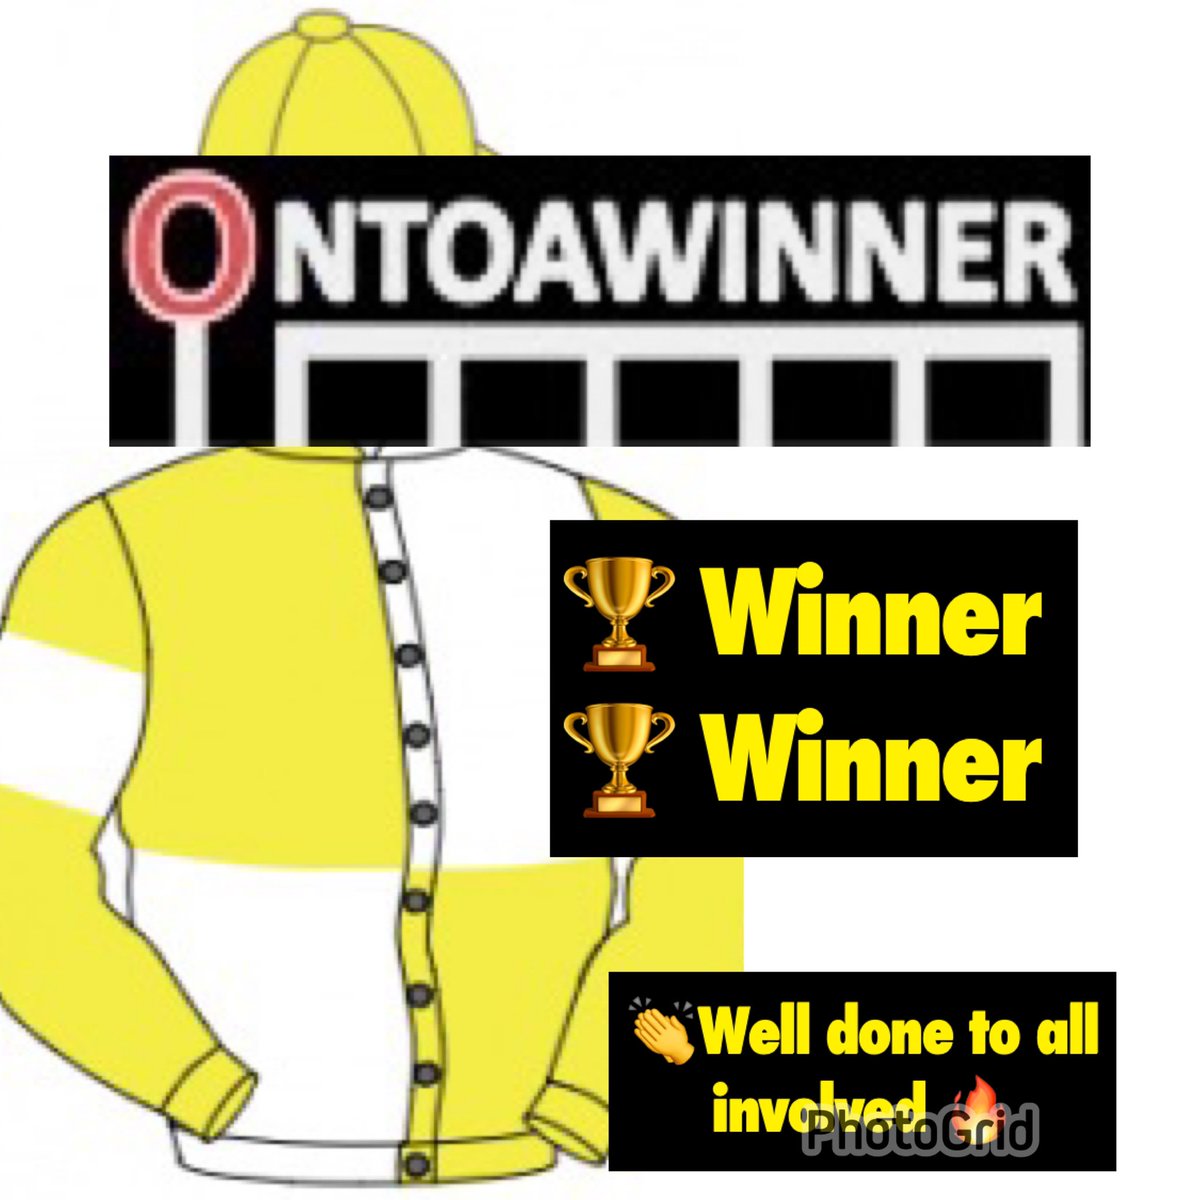 🔥 Winner Winner chicken Dinner 🥘 👏👏👏 Quiet Resolve wins the race at Newcastle 17:30 🏆 Great ride Billy Garritty Trained by Richard Fahey Congratulations to all connections. ontoawinner.net We’re #ontoawinner